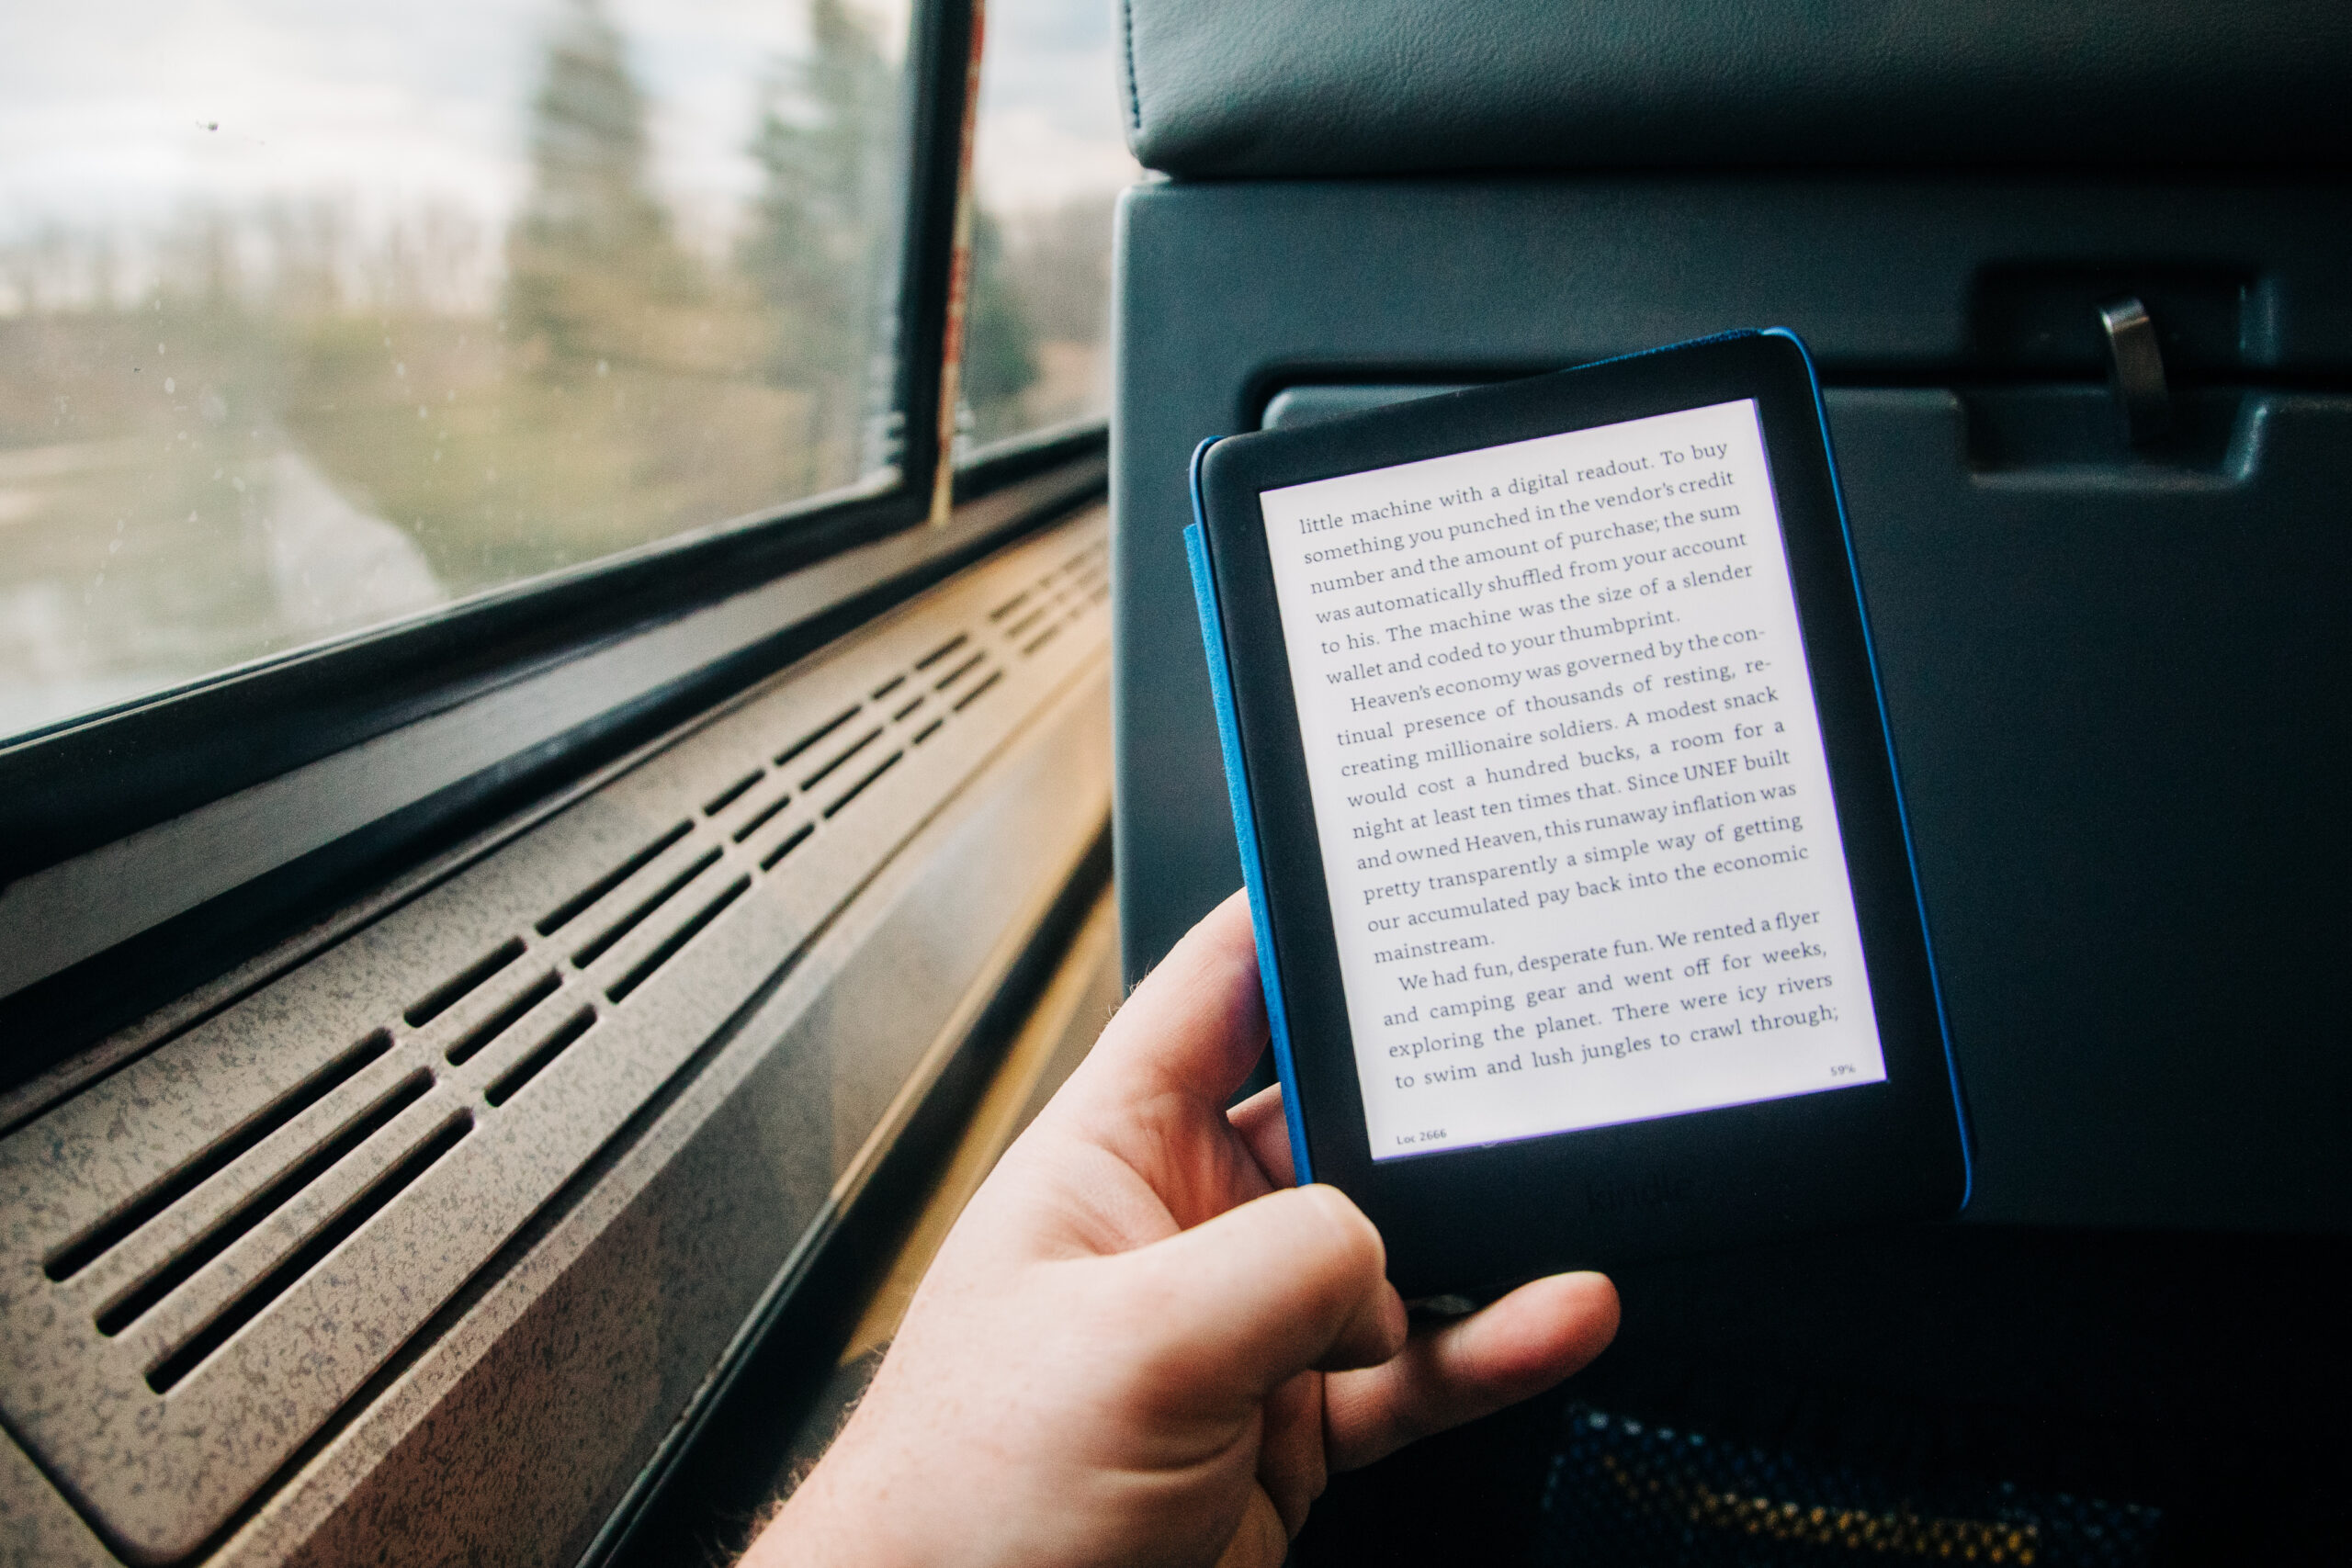 Amazon’s new $89 Kindle has everything most readers need